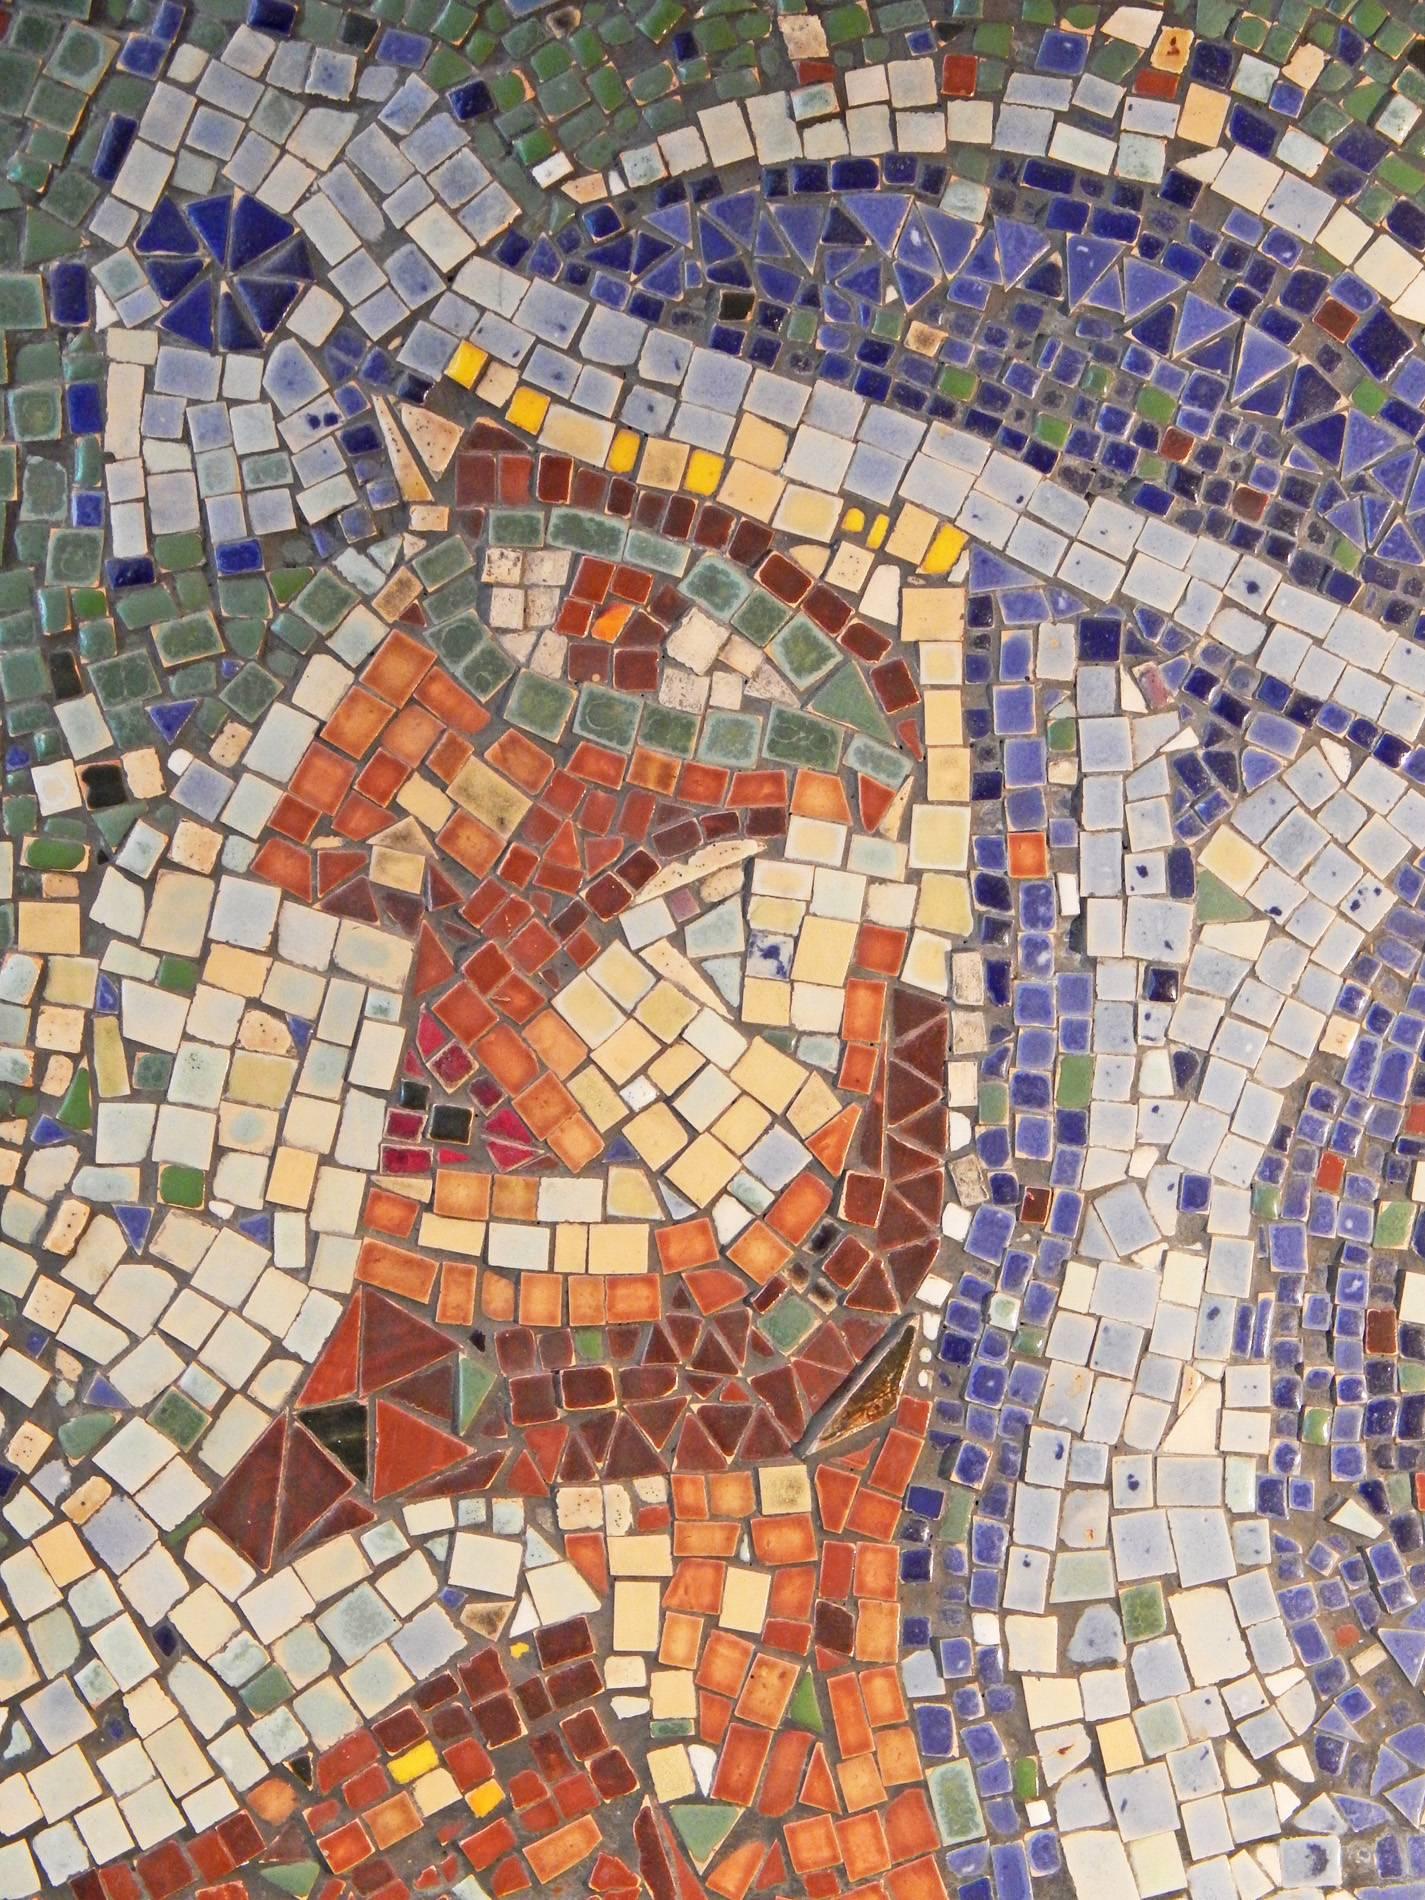 Made up of a rich variety of color-drenched ceramic tesserae, this unique mosaic panel depicts a bearded Egyptian head in profile, his headdress vivid in tones of periwinkle and purple, his face ruddy in hues of burnt sienna, deep red and earth.